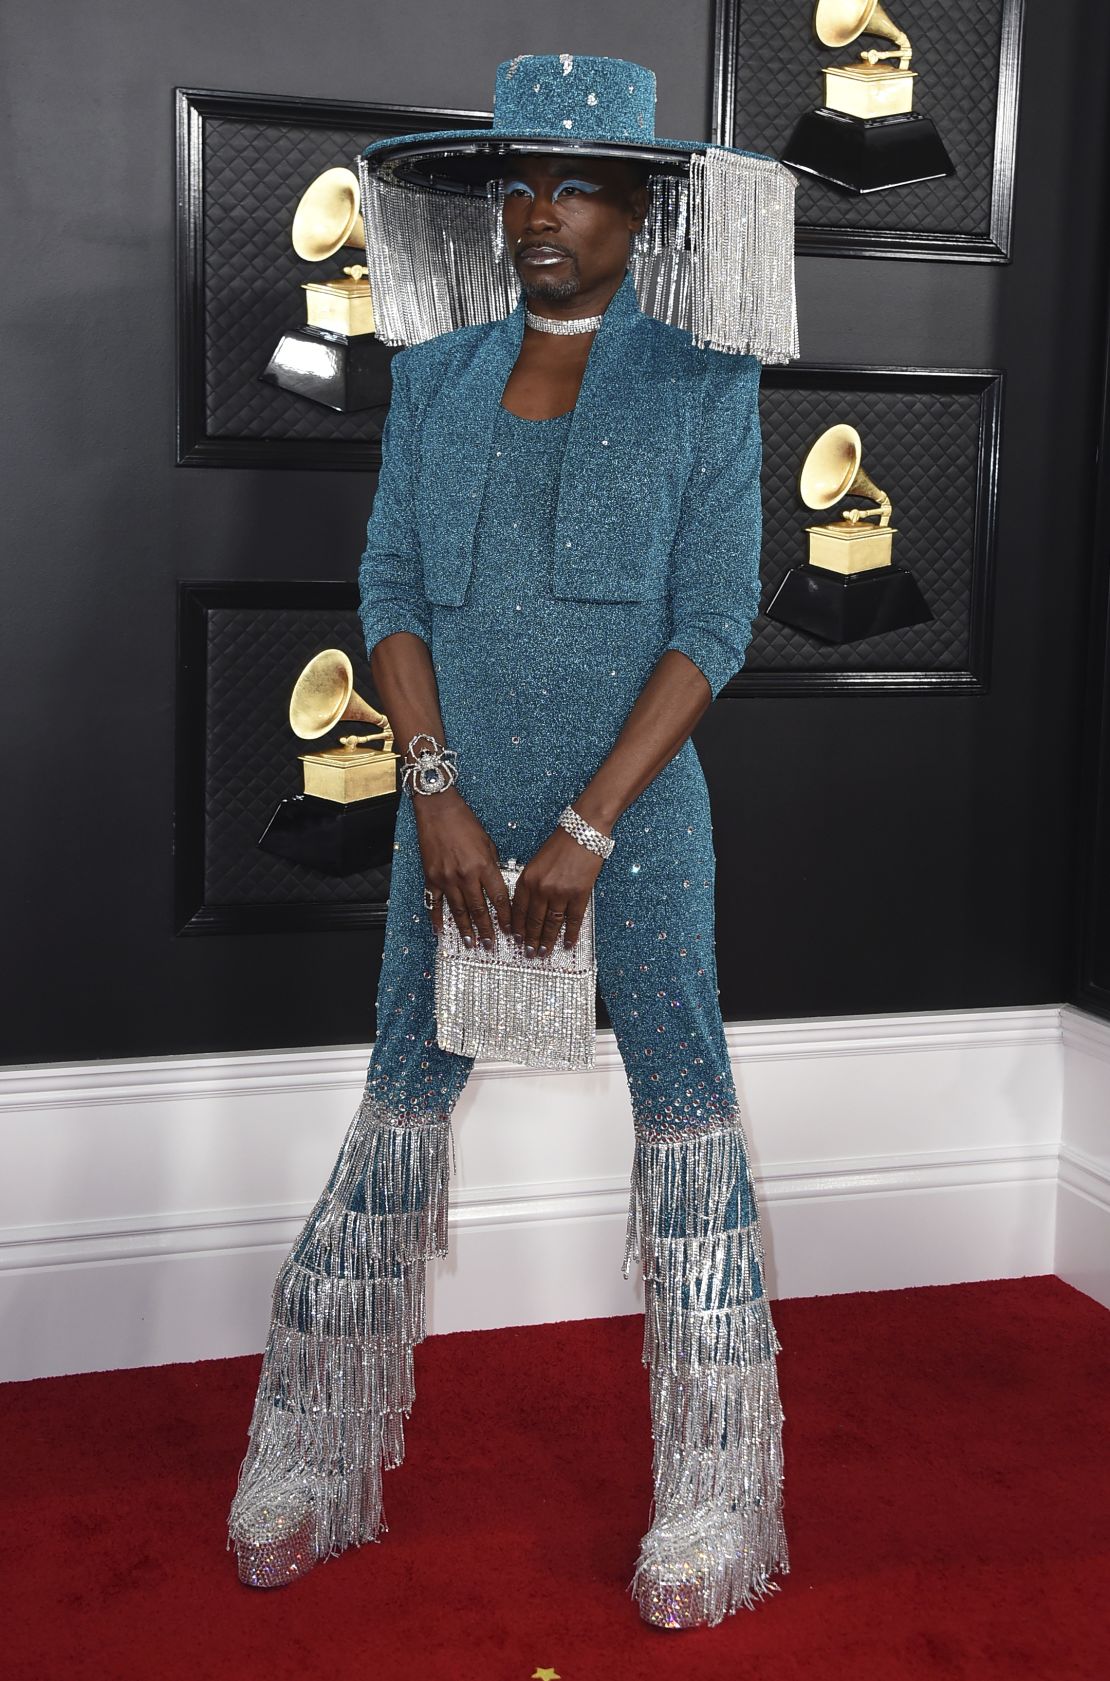 Billy Porter arrives at the 62nd annual Grammy Awards at the Staples Center on Sunday, Jan. 26, 2020, in Los Angeles.